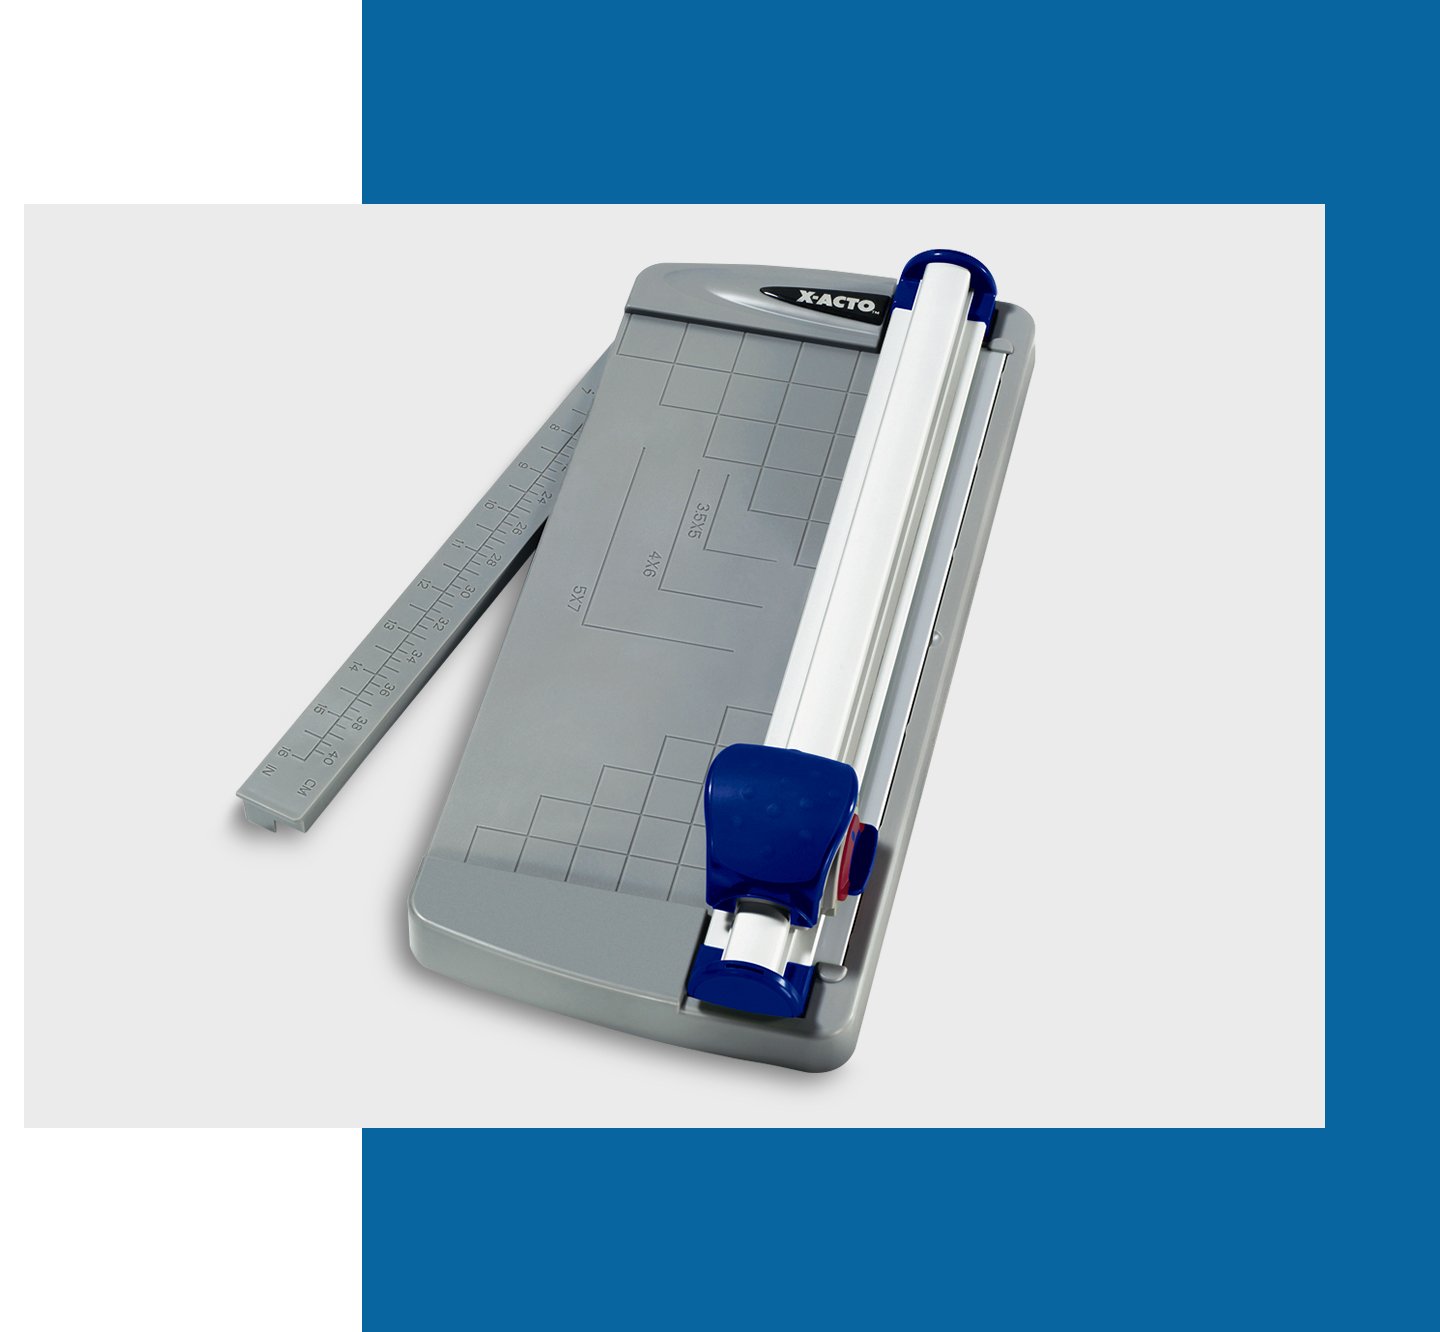 How to use the paper cutter 